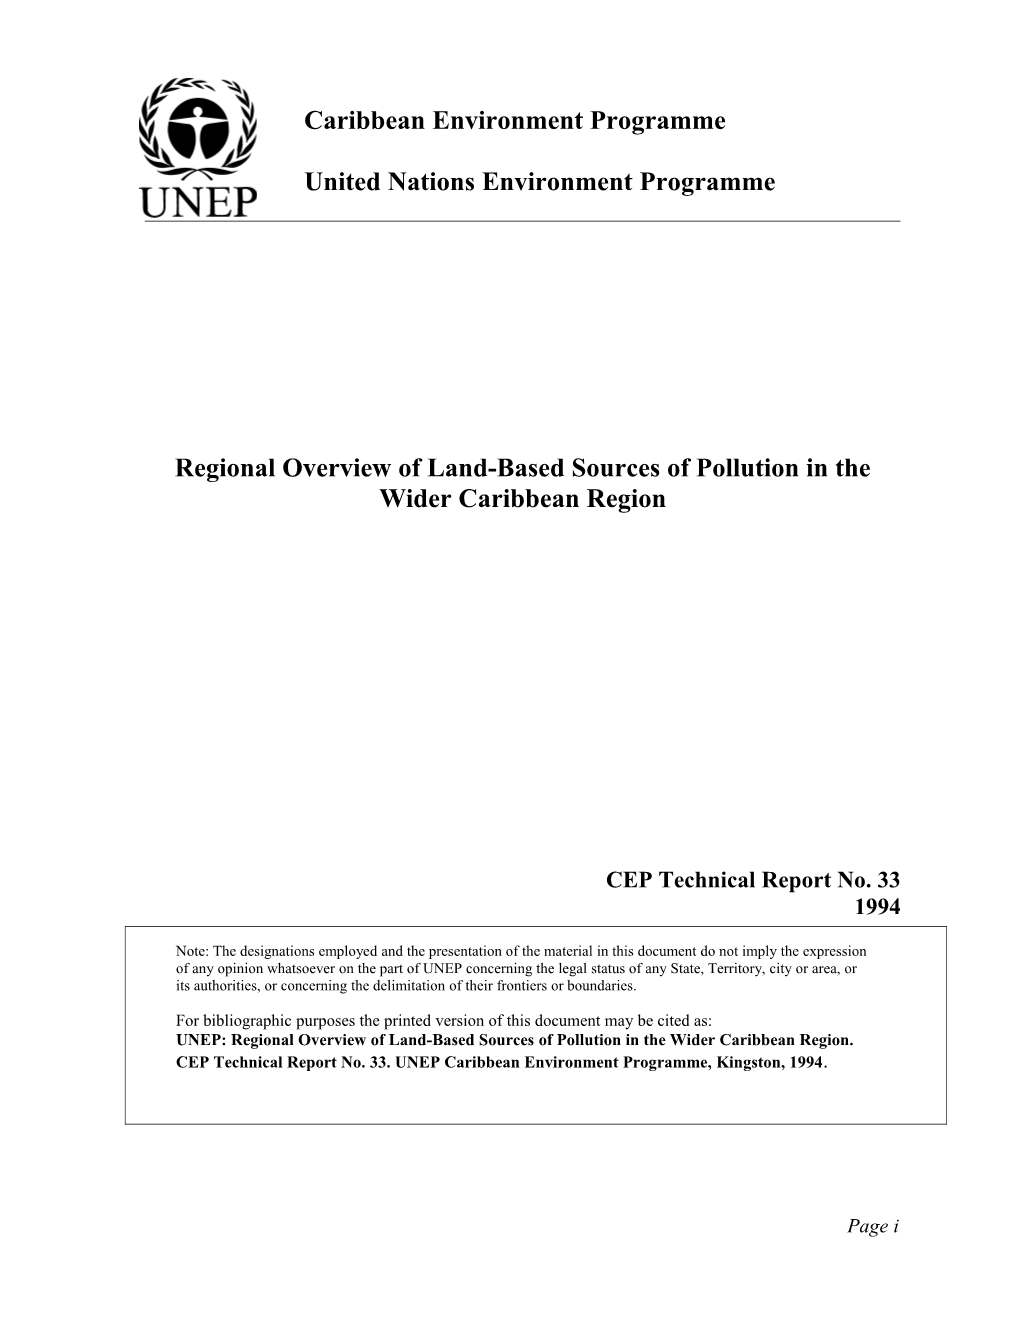 Regional Overview of Land-Based Sources of Pollution in the Wider Caribbean Region